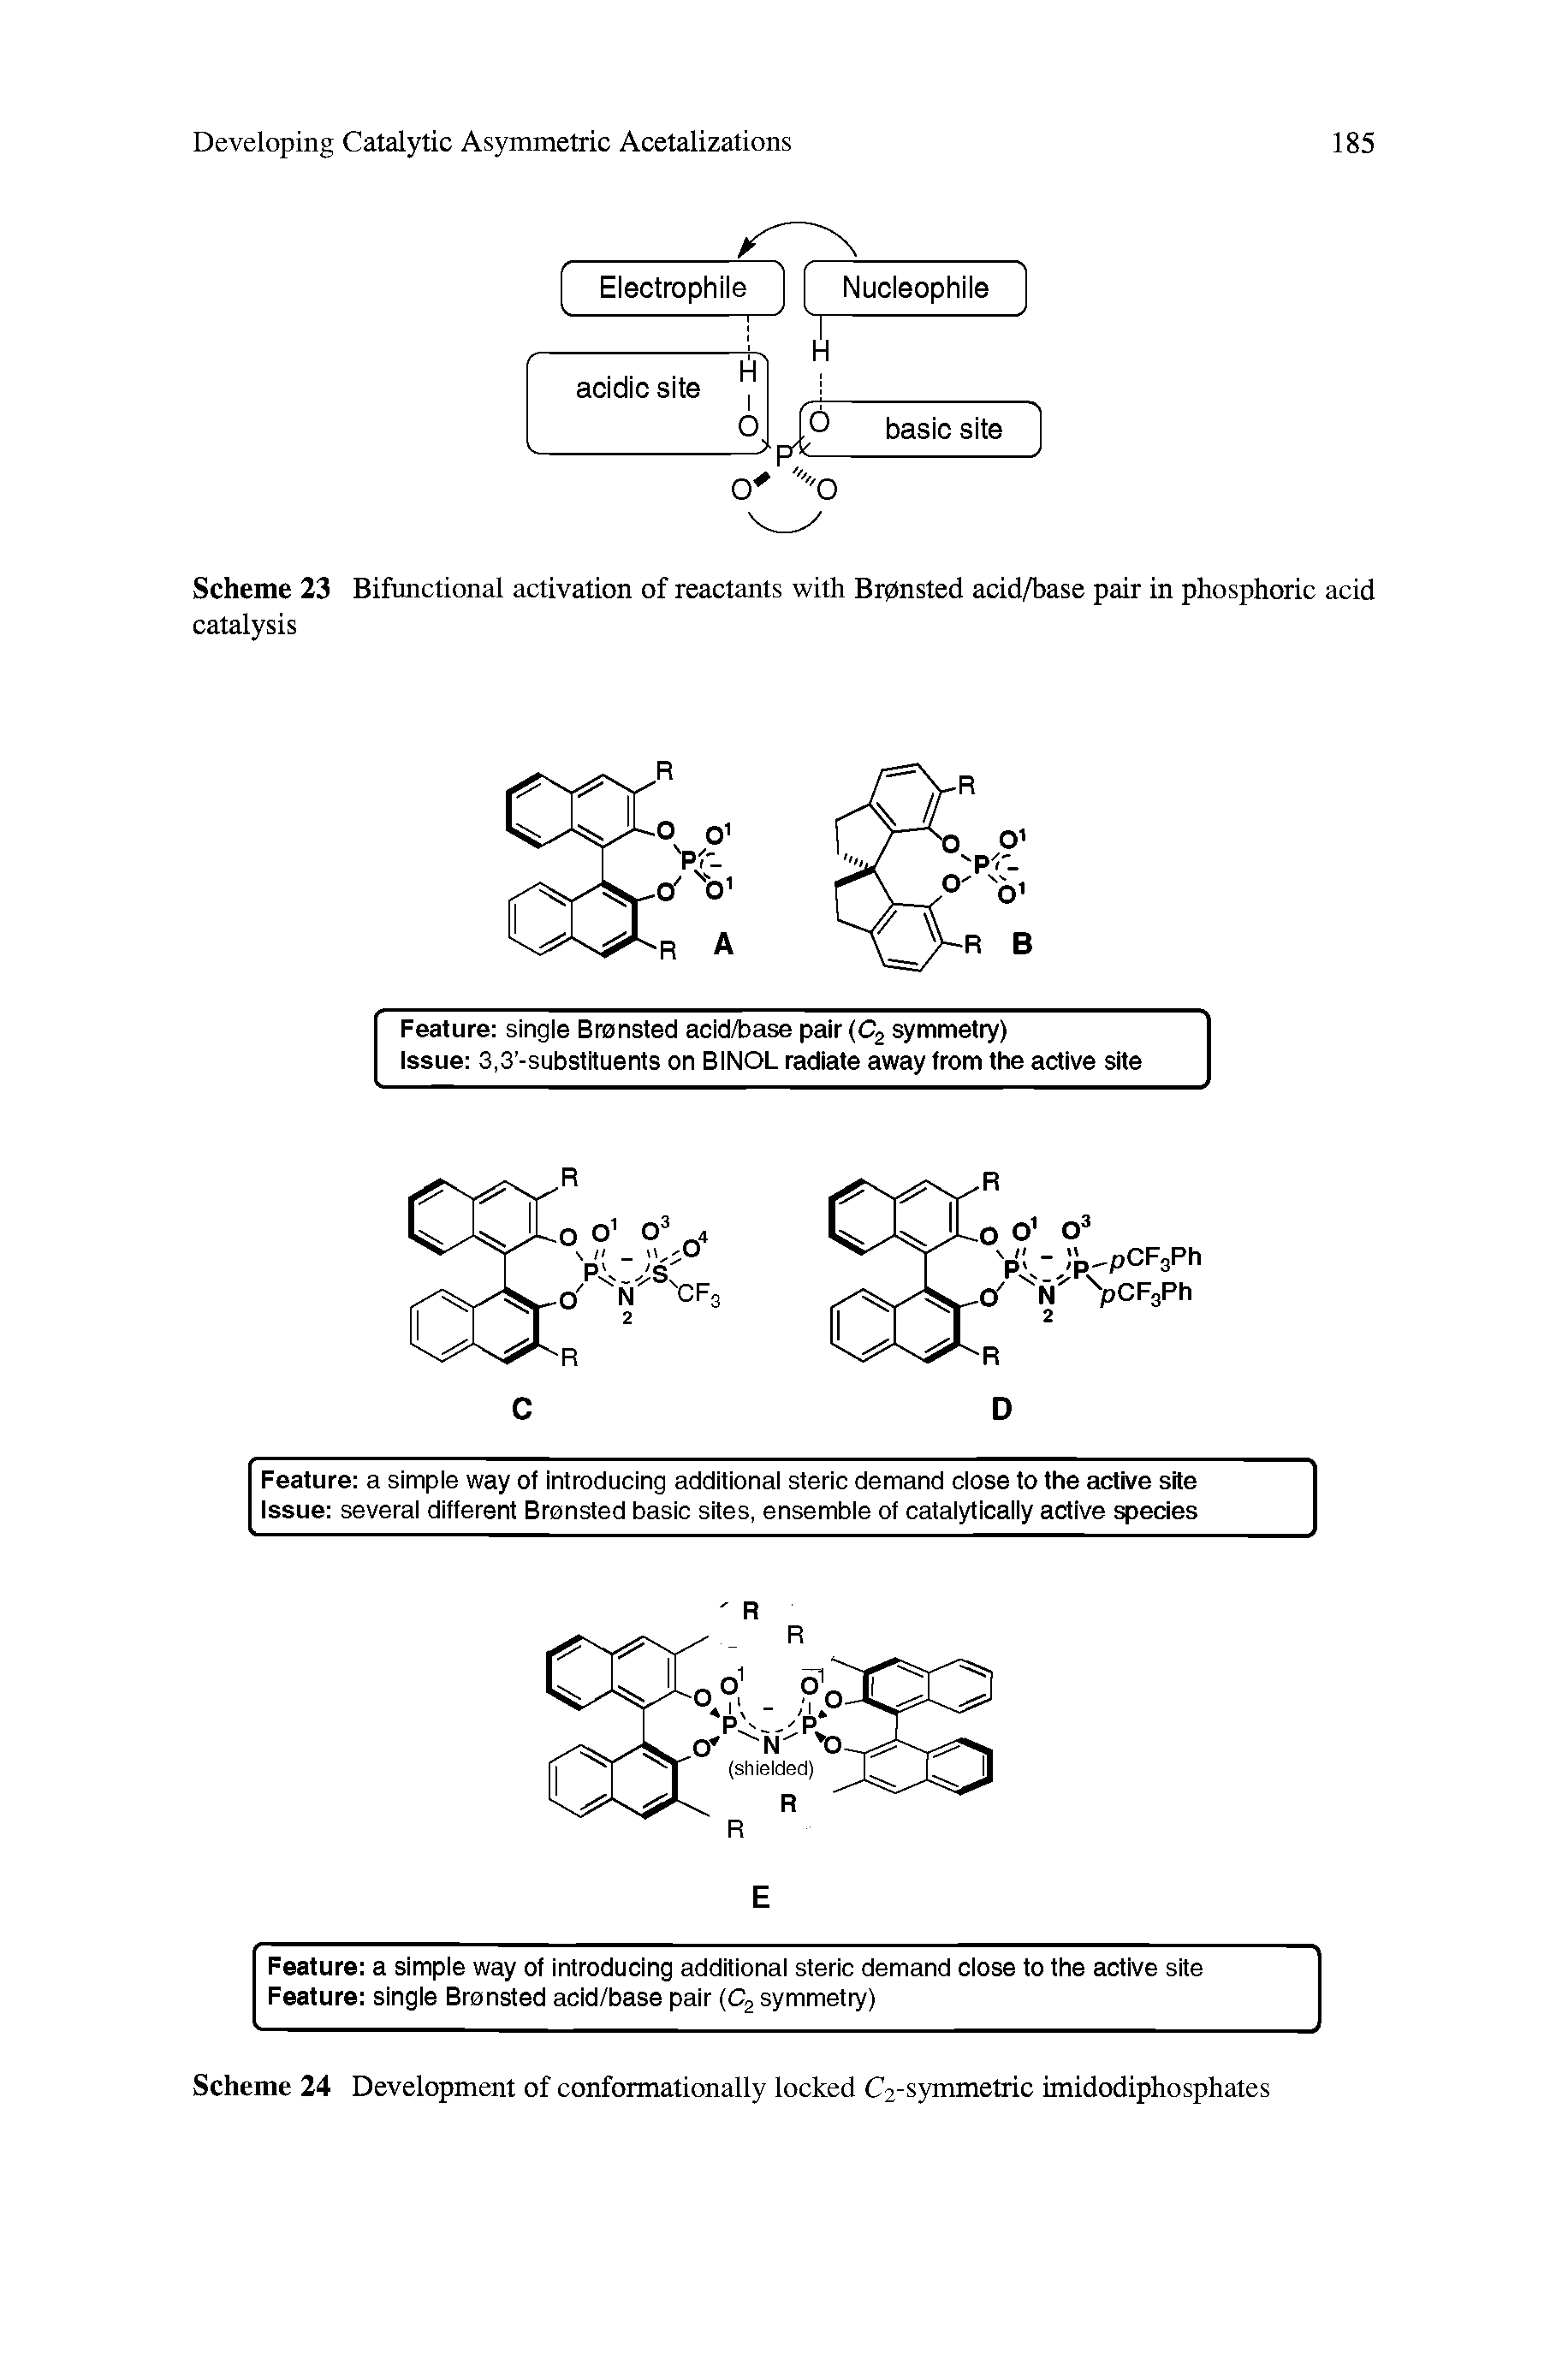 Scheme 23 Bifunctional activation of reactants with Brpnsted acid/base pair in phosphoric acid catalysis...